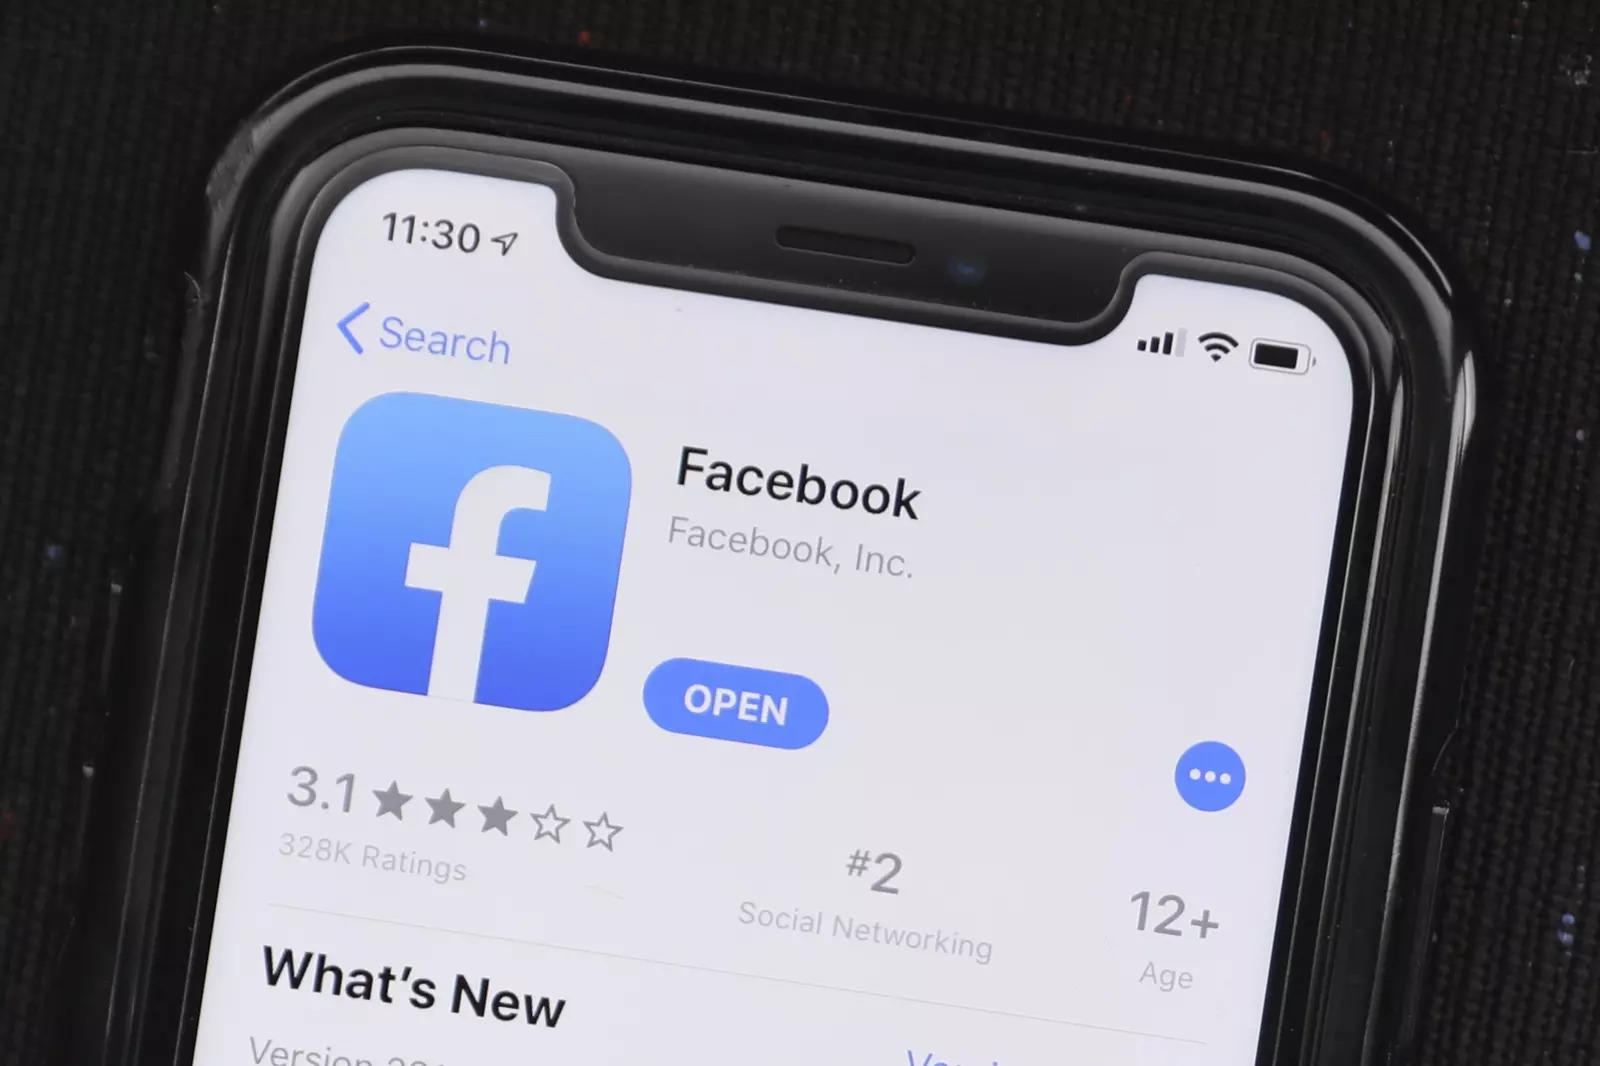 Facebook wants to launch itself as an App Store in Europe